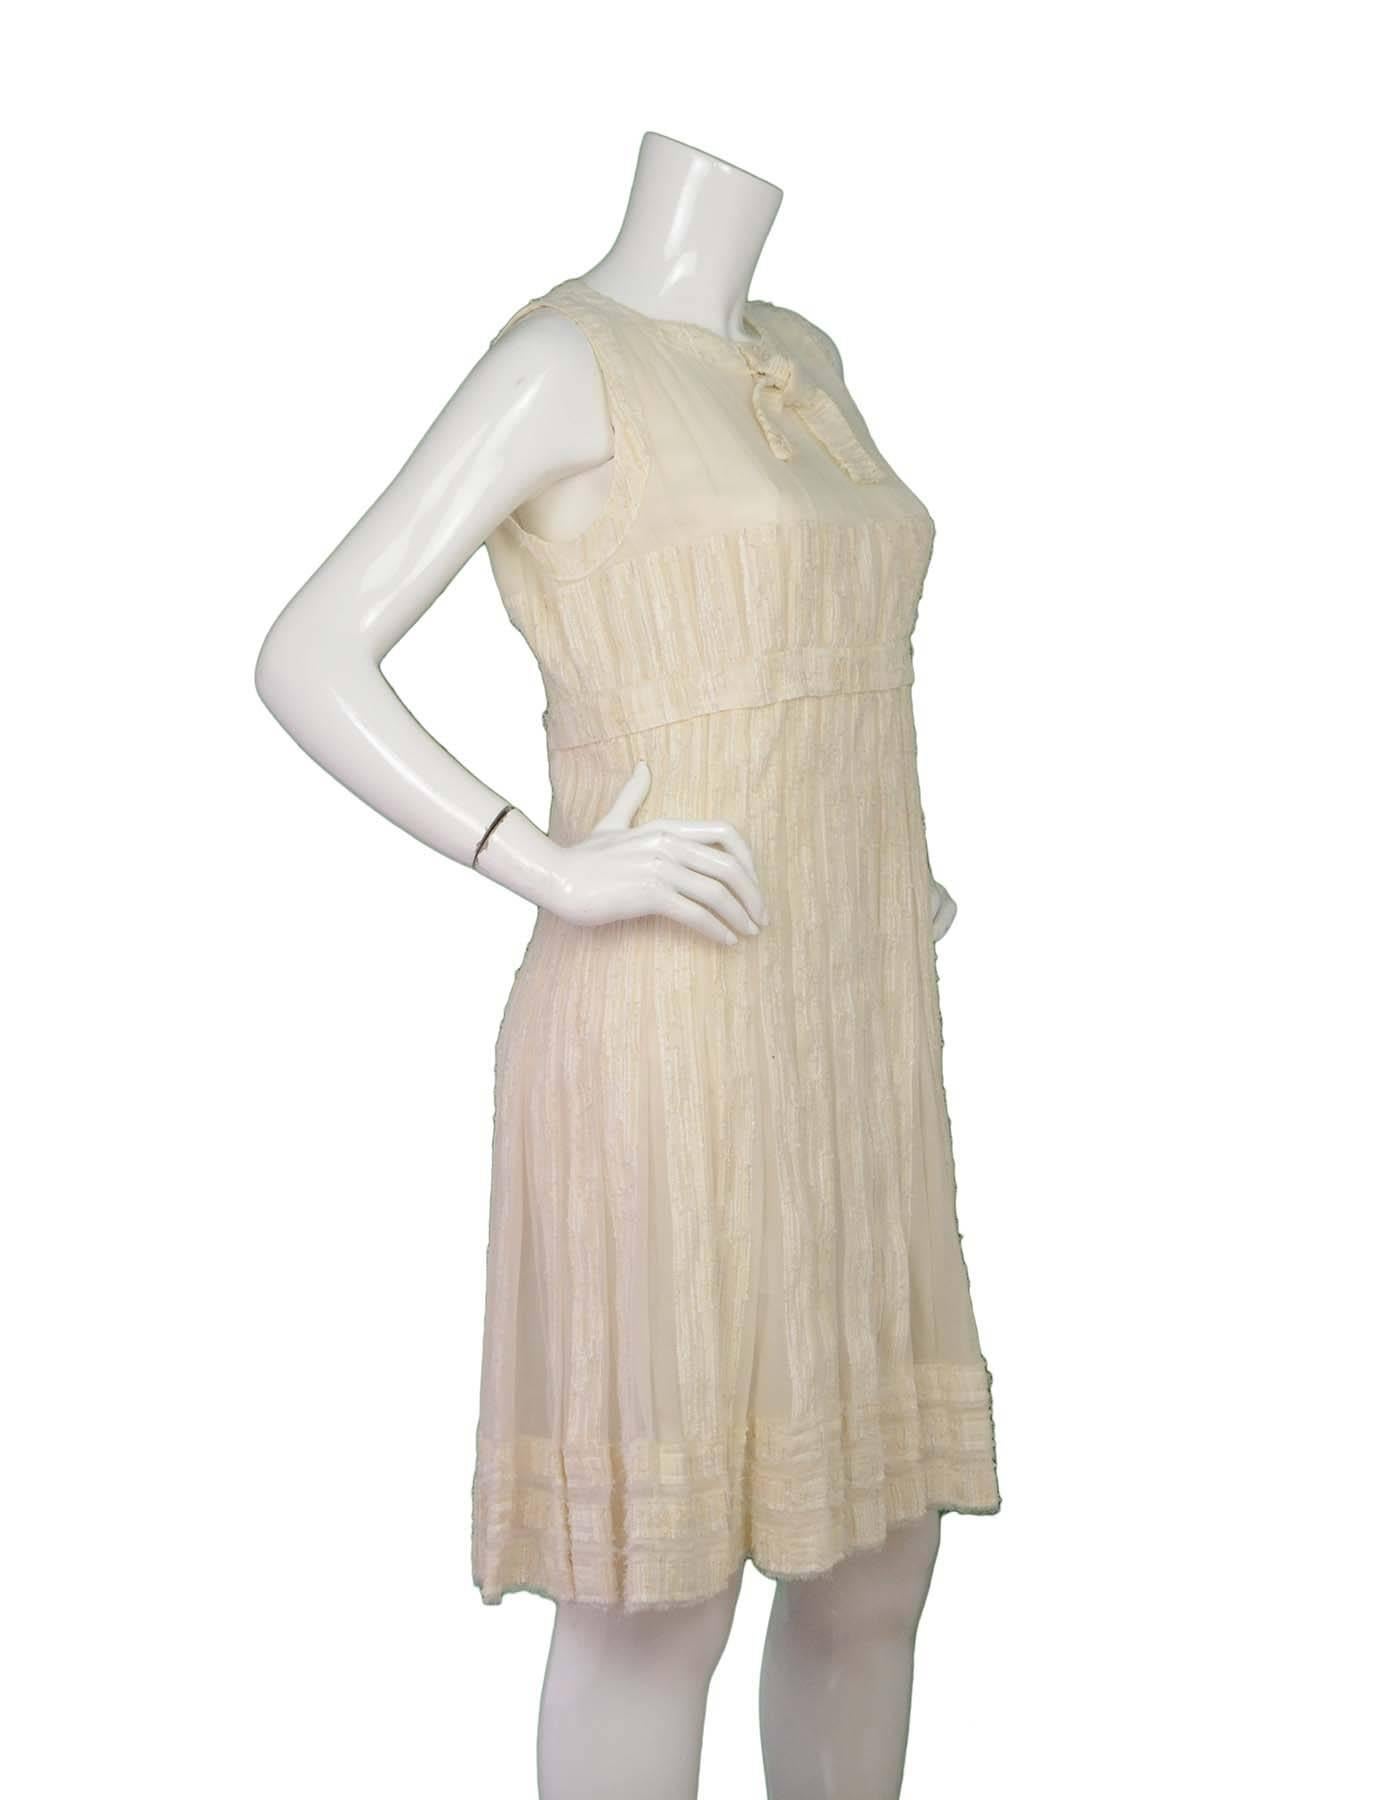 Chanel Cream Silk Dress Sz 42

Features necktie and silver detail threading throughout

Made In: France
Year of Production: 2007 Cruise
Color: Cream and silver
Composition: 100% Silk
Lining: Silk lining at waist down
Closure/Opening: Button